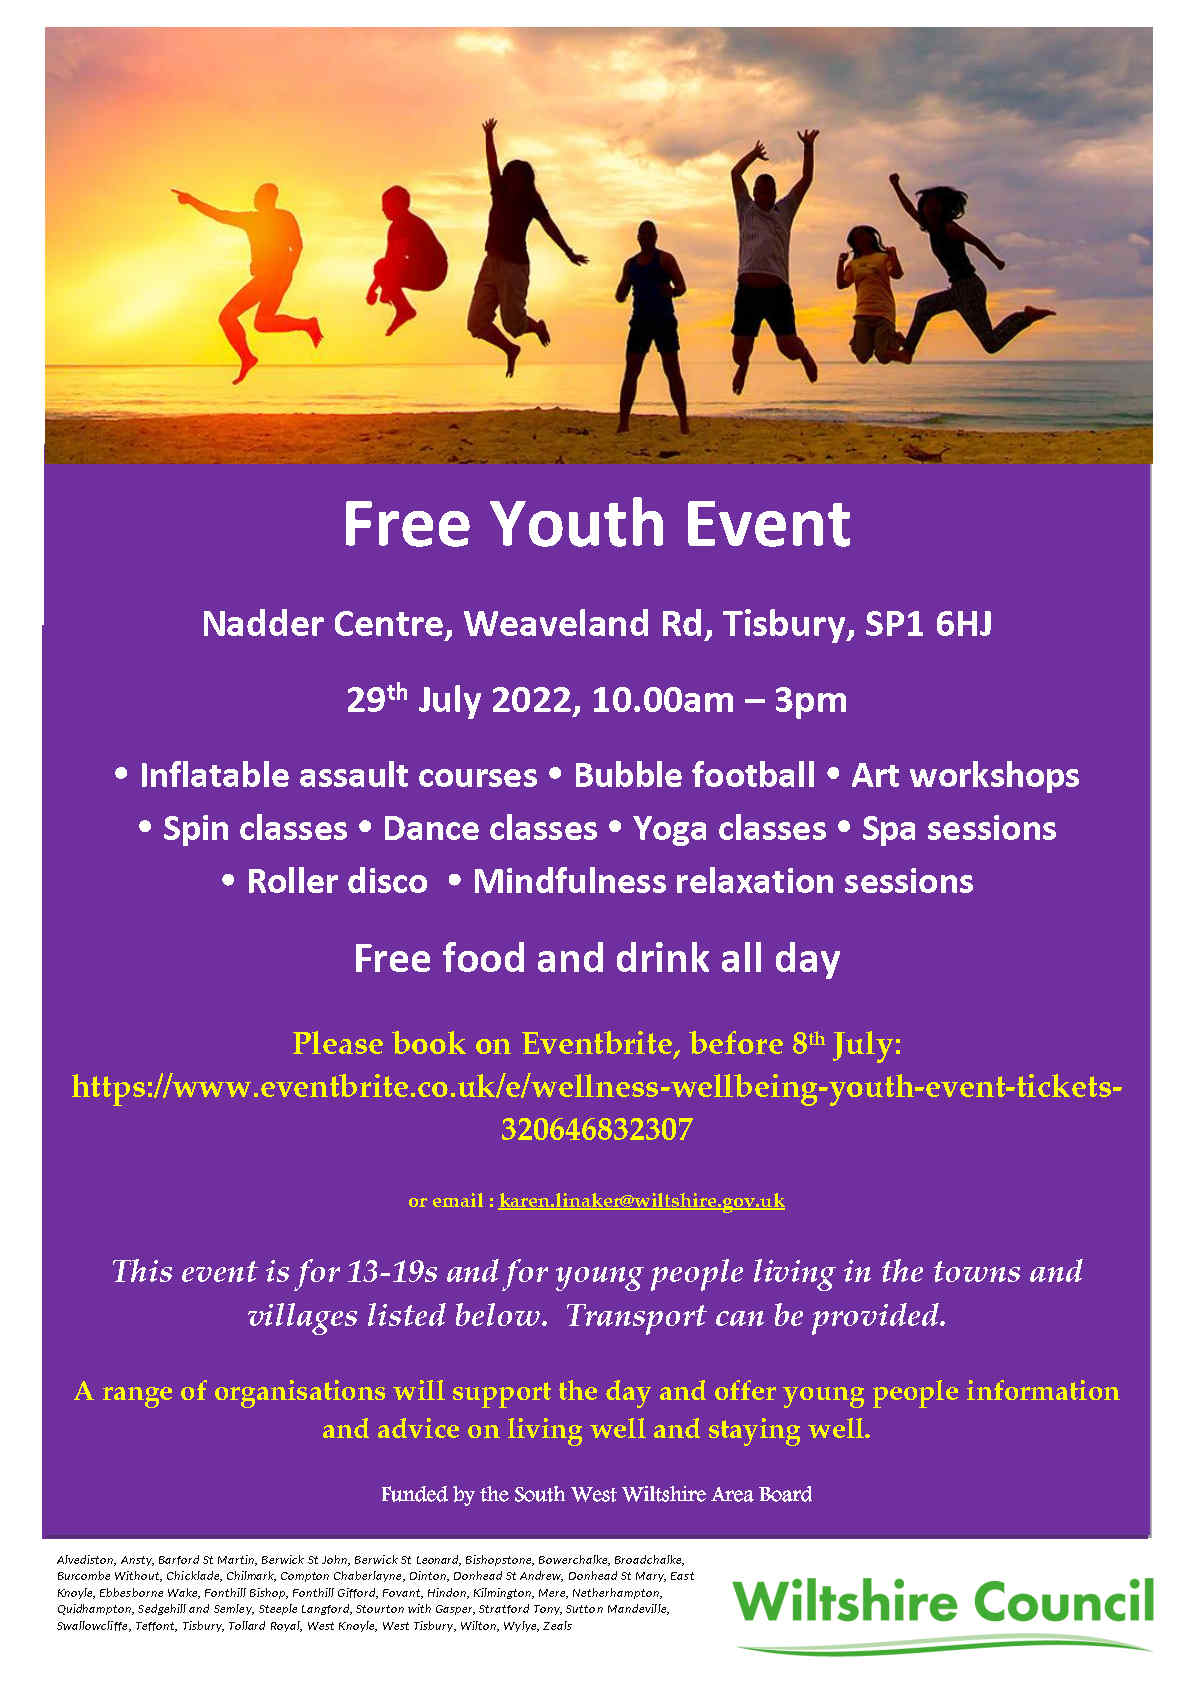 Free Youth Event - at the Nadder Centre